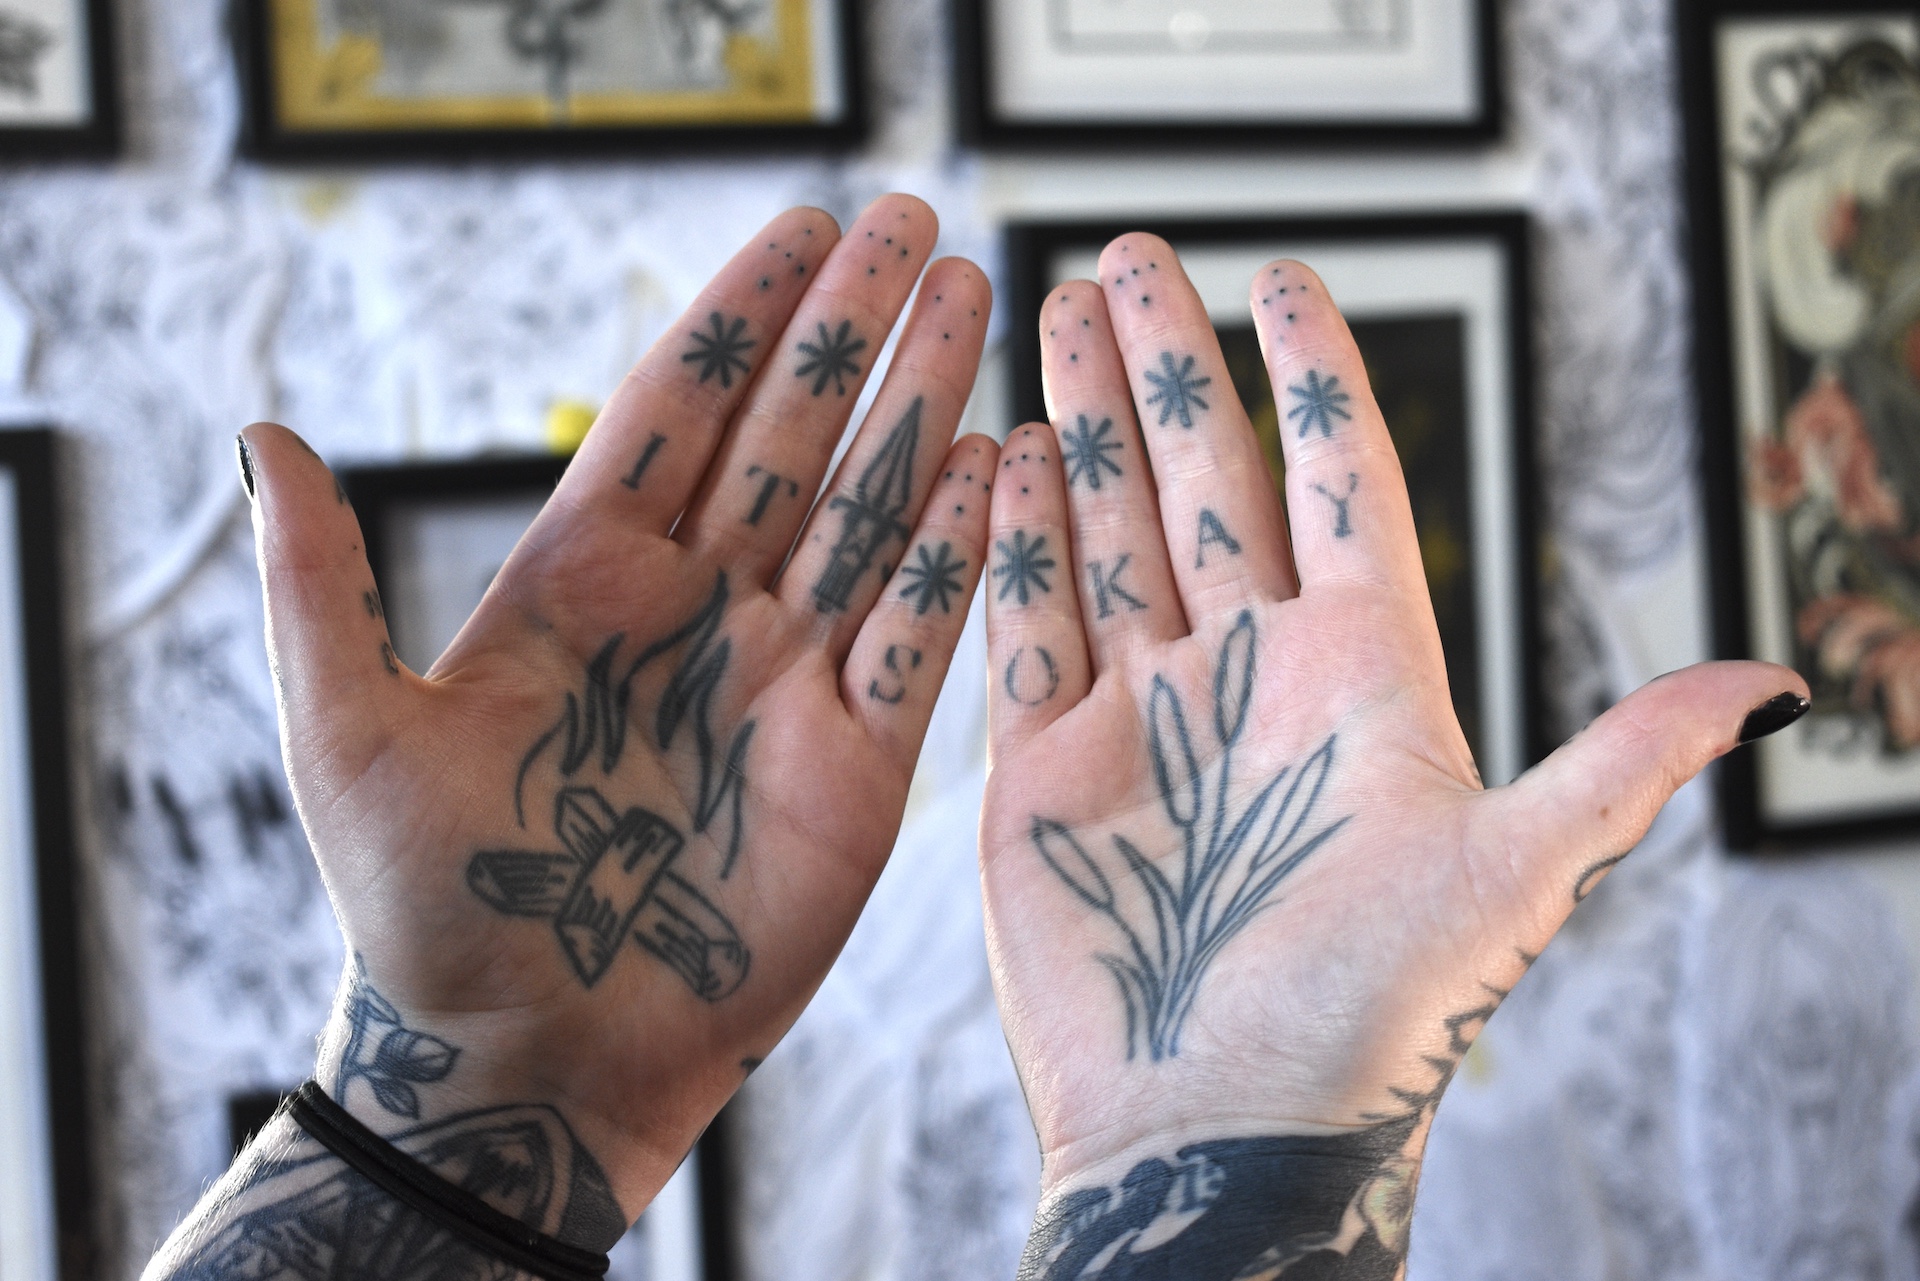 Hands side by side in front of wall full of art. Hand tattoos read "It's okay."